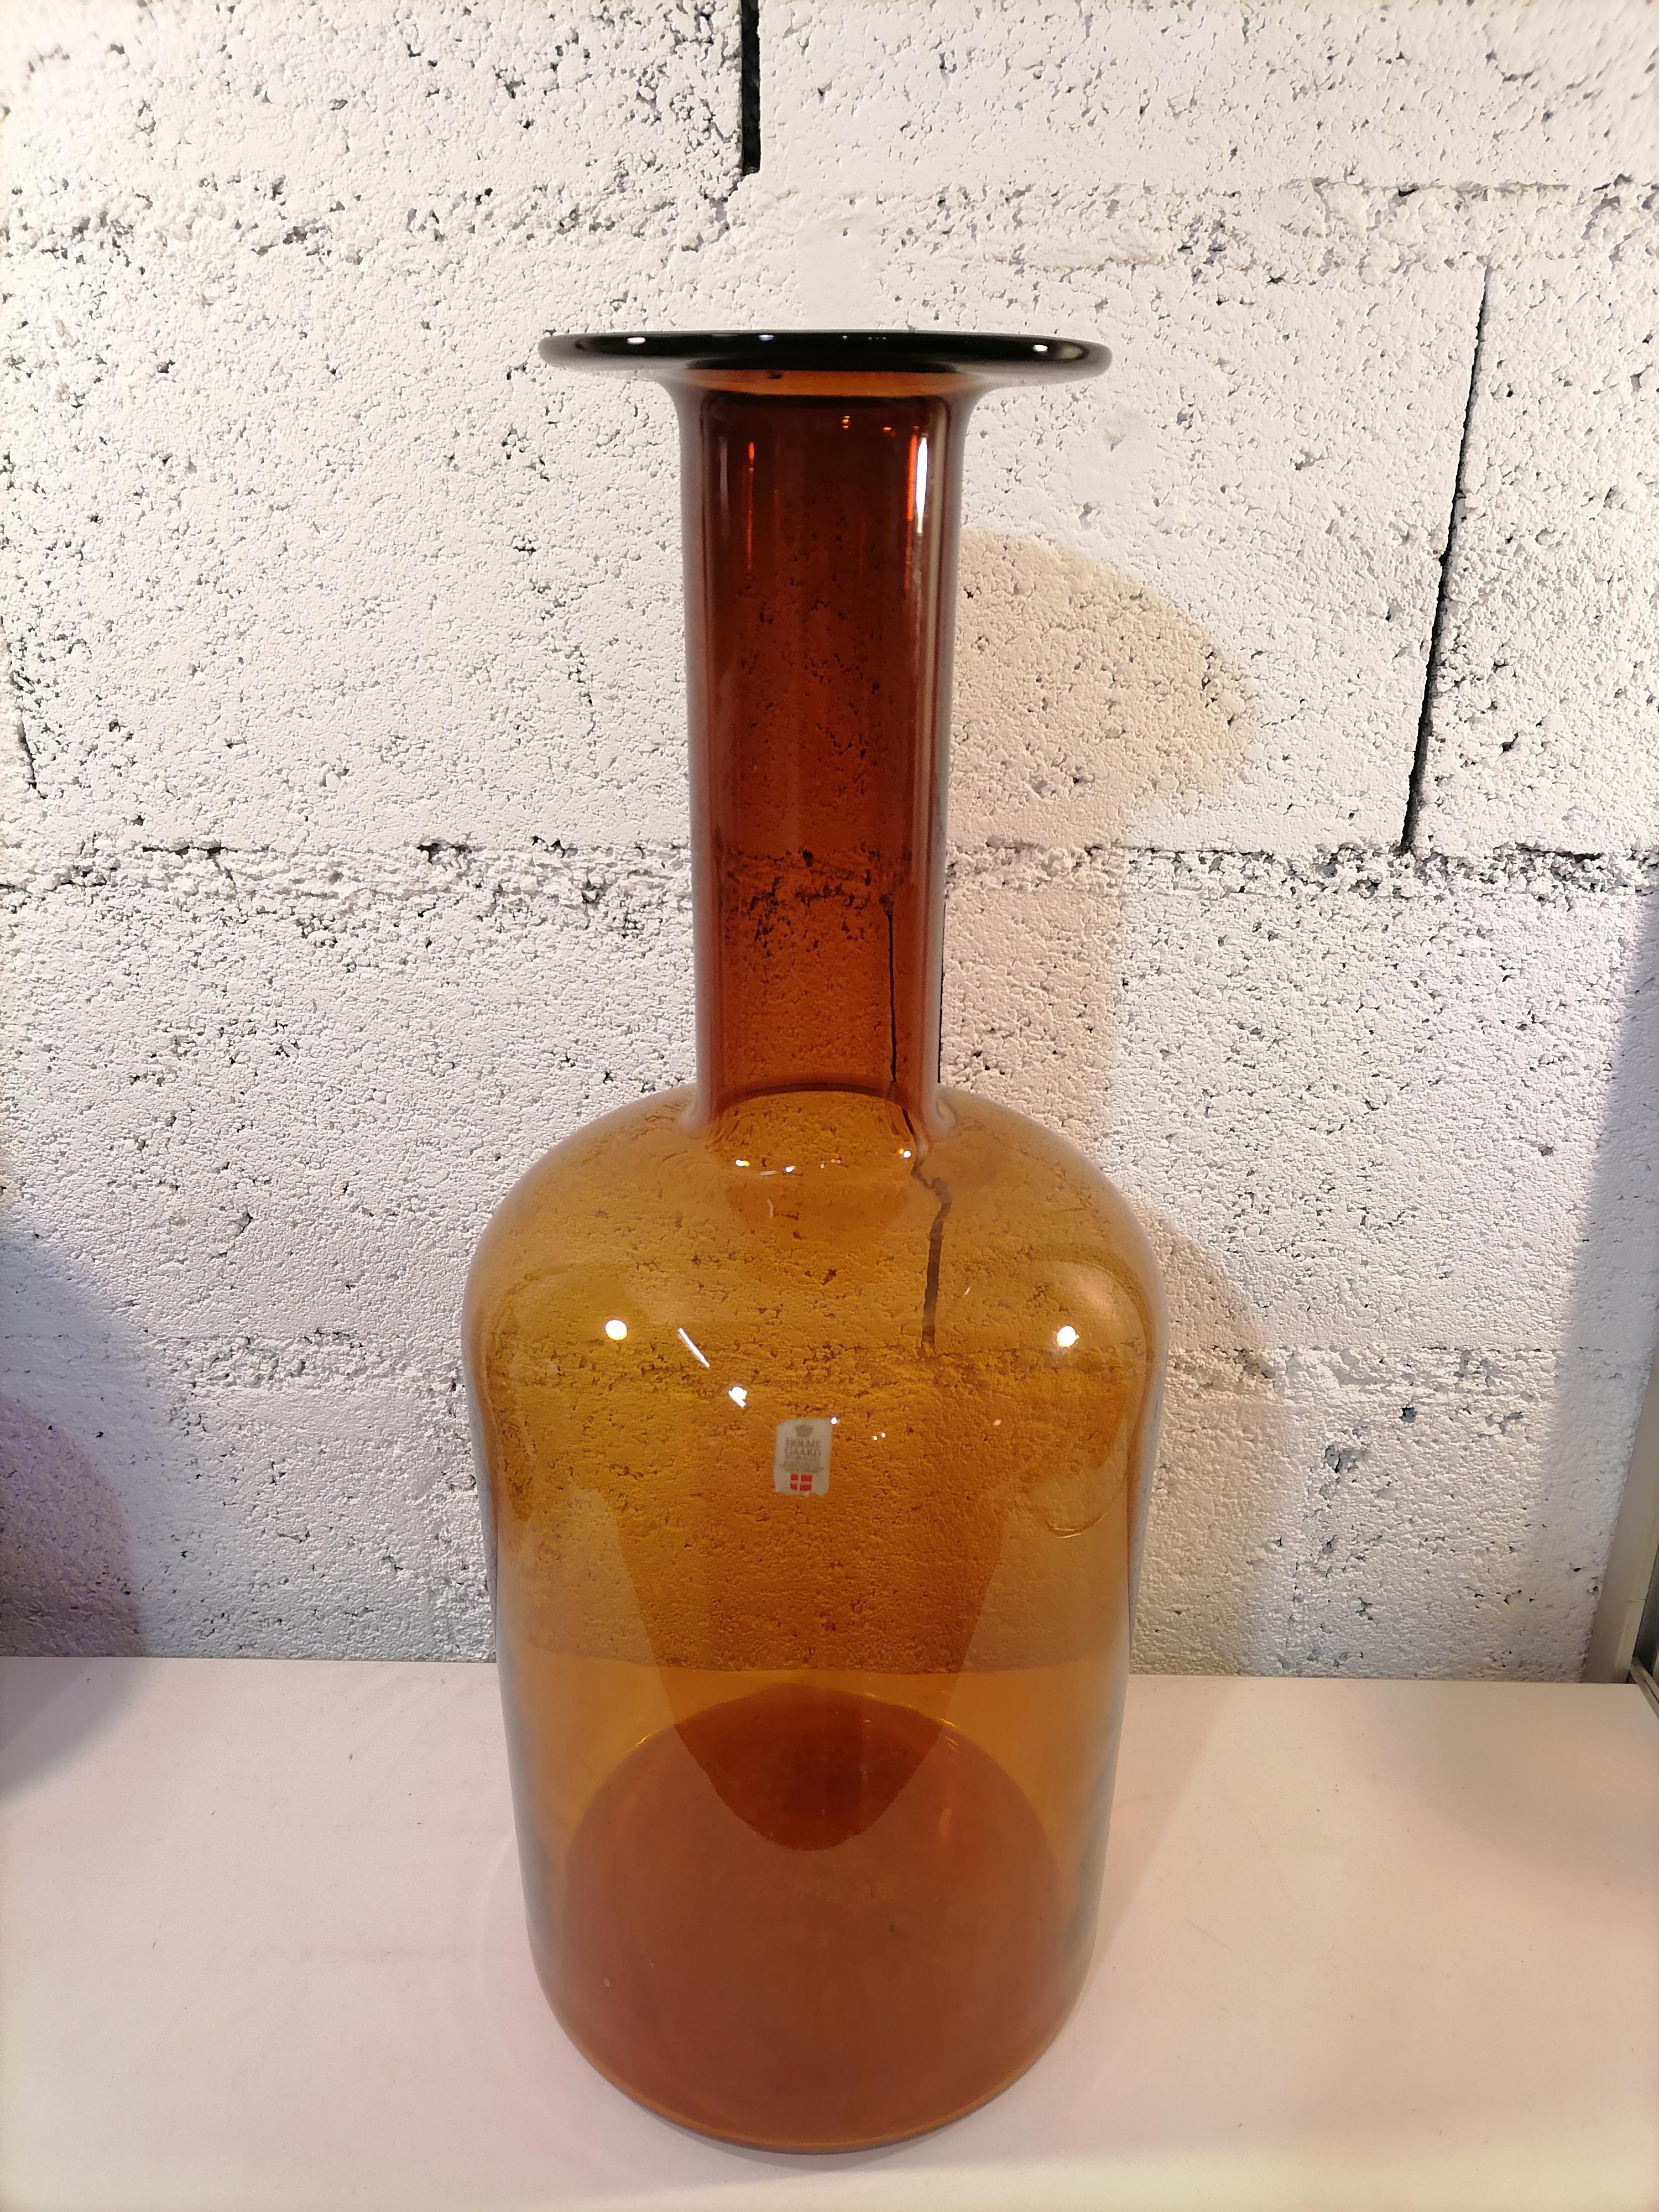 Otto Brauer Scandinavian vase bottle Holmegaard 1960, 50cm

Big vase or bottle in brown art glass
Made in Denmark in the 1960's with original label.
There is a set available with an other brown bottle and 2 blue

Measures: height 50 cm